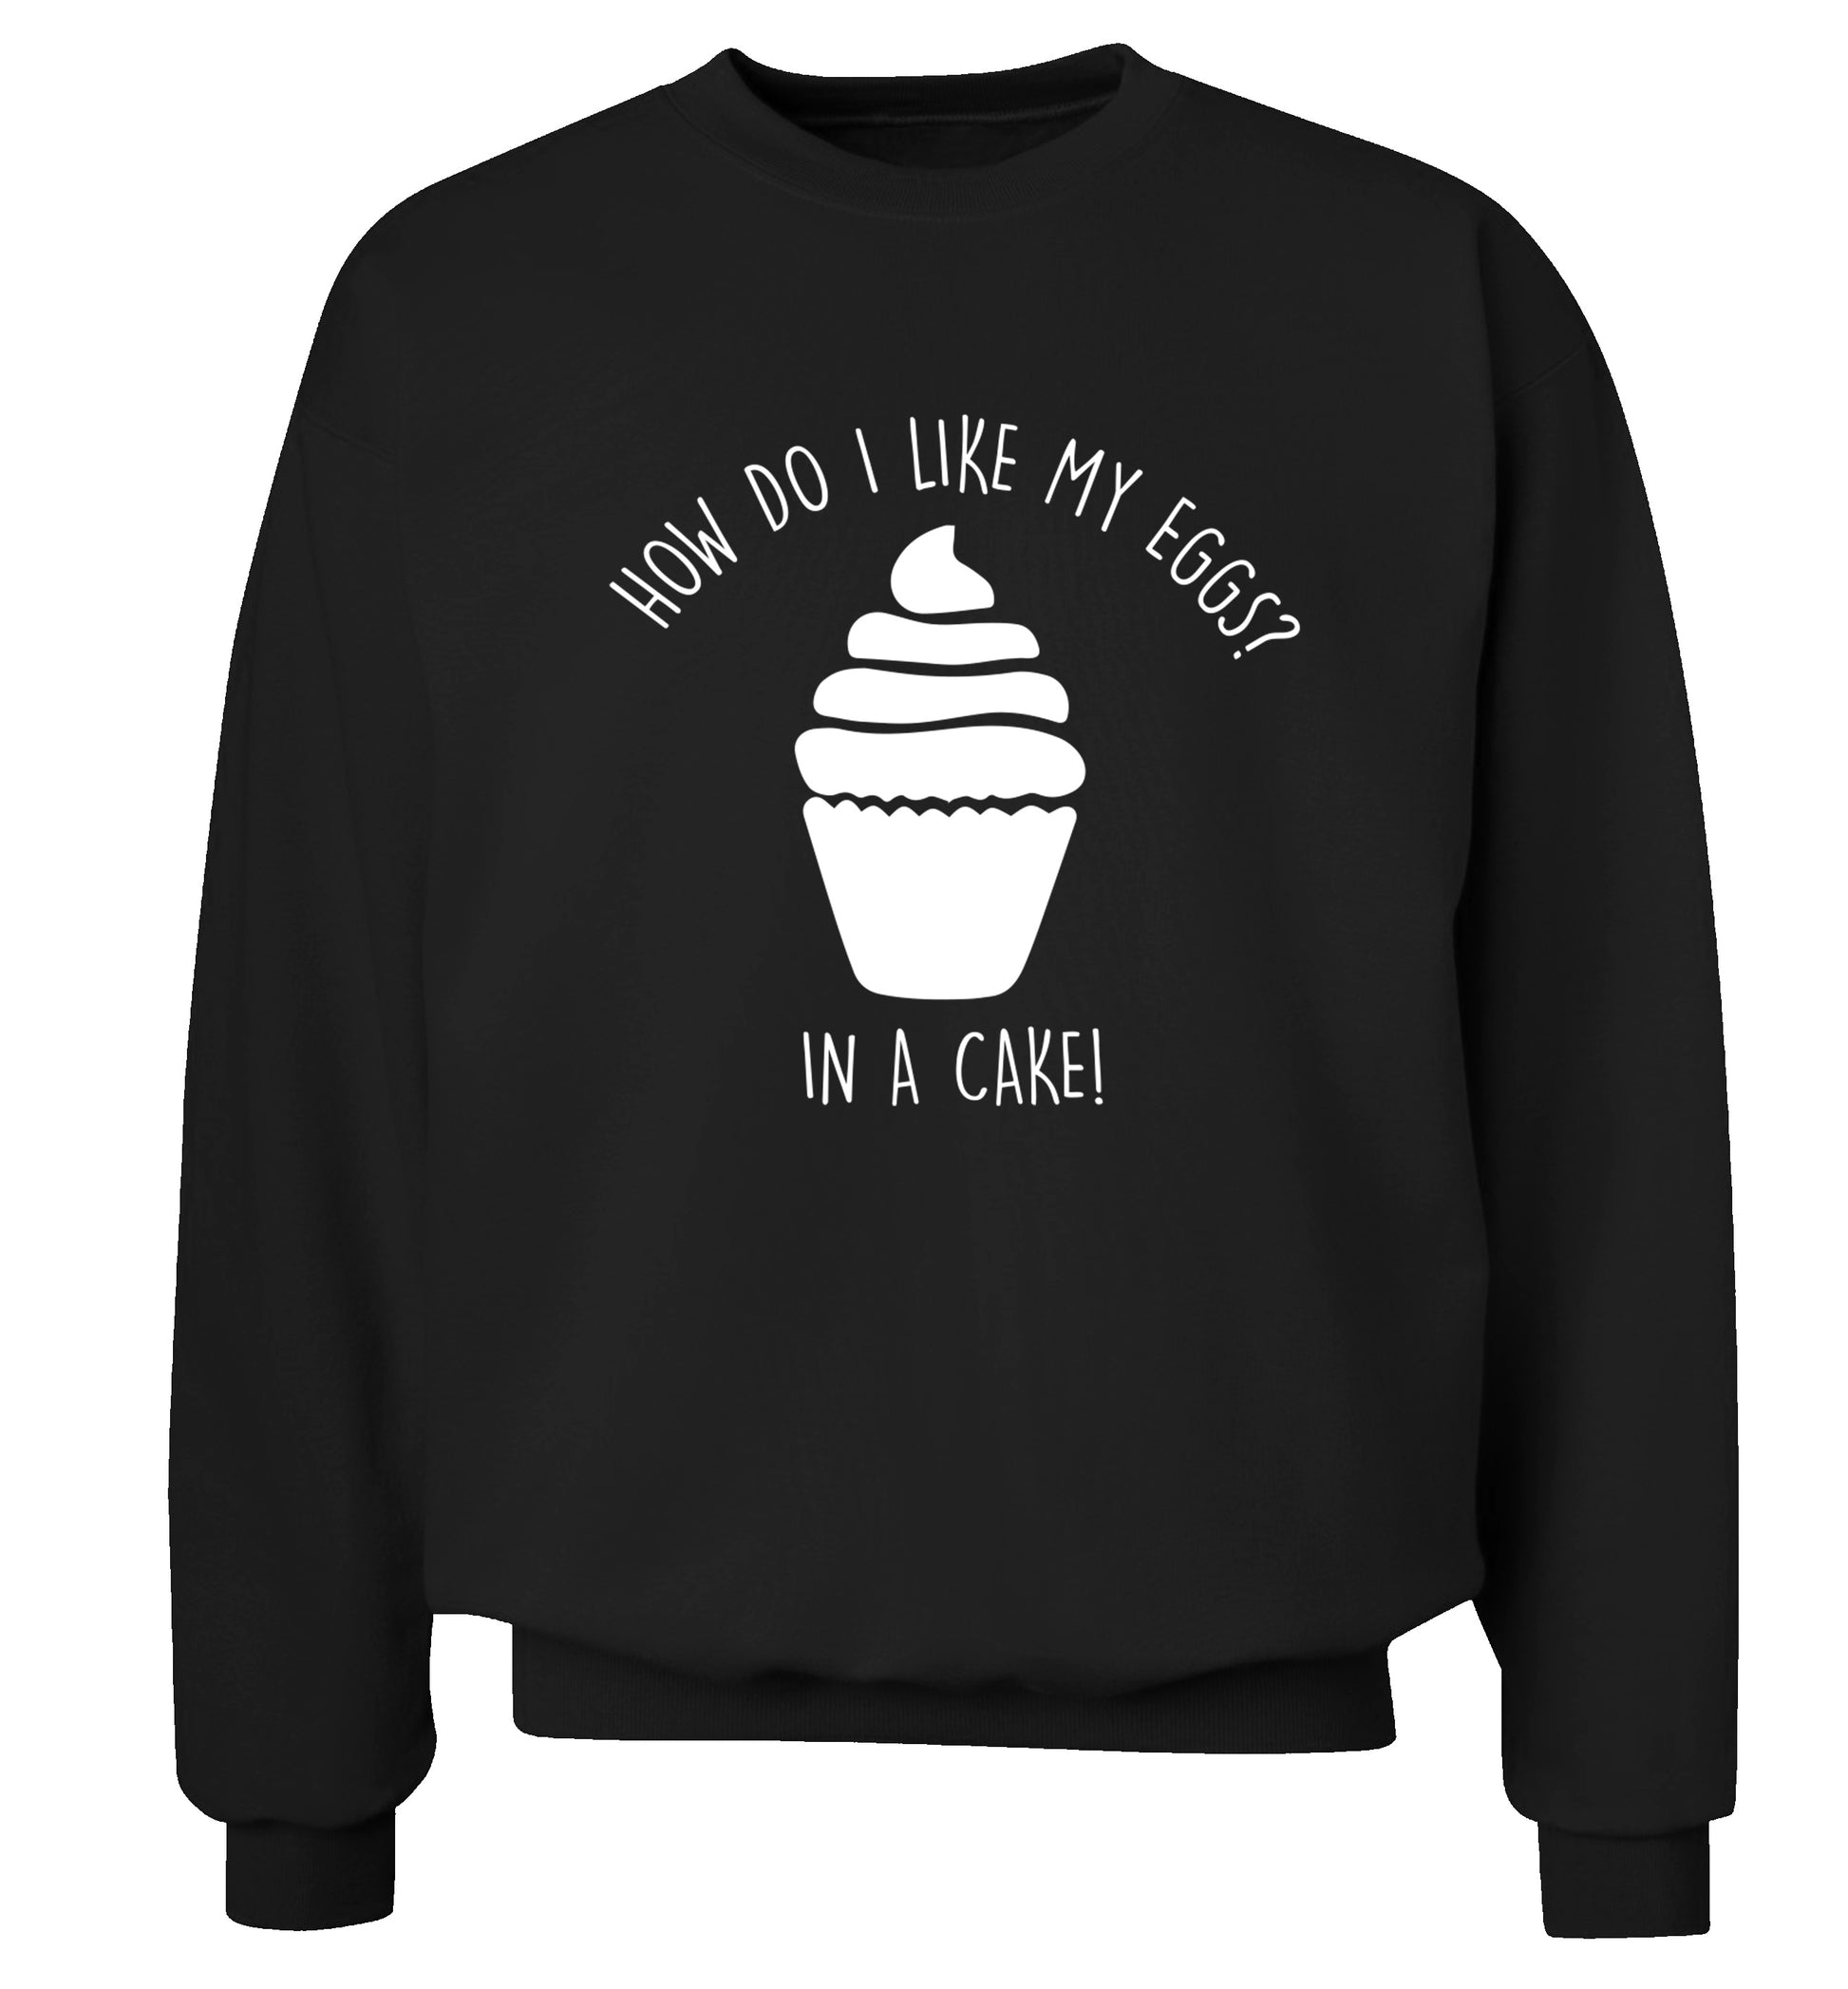 How do I like my eggs? In a cake! Adult's unisex black Sweater 2XL